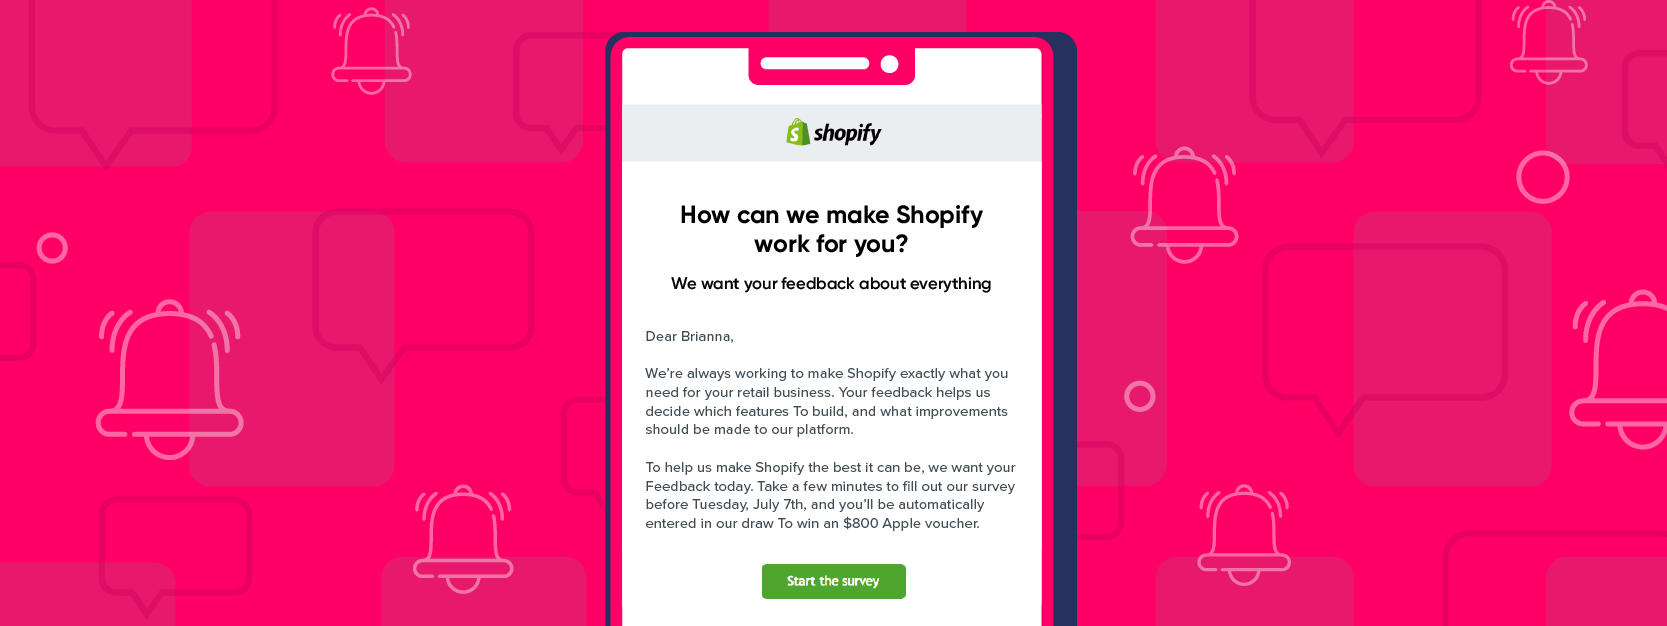 Email marketing channel - image of a Shopify email 